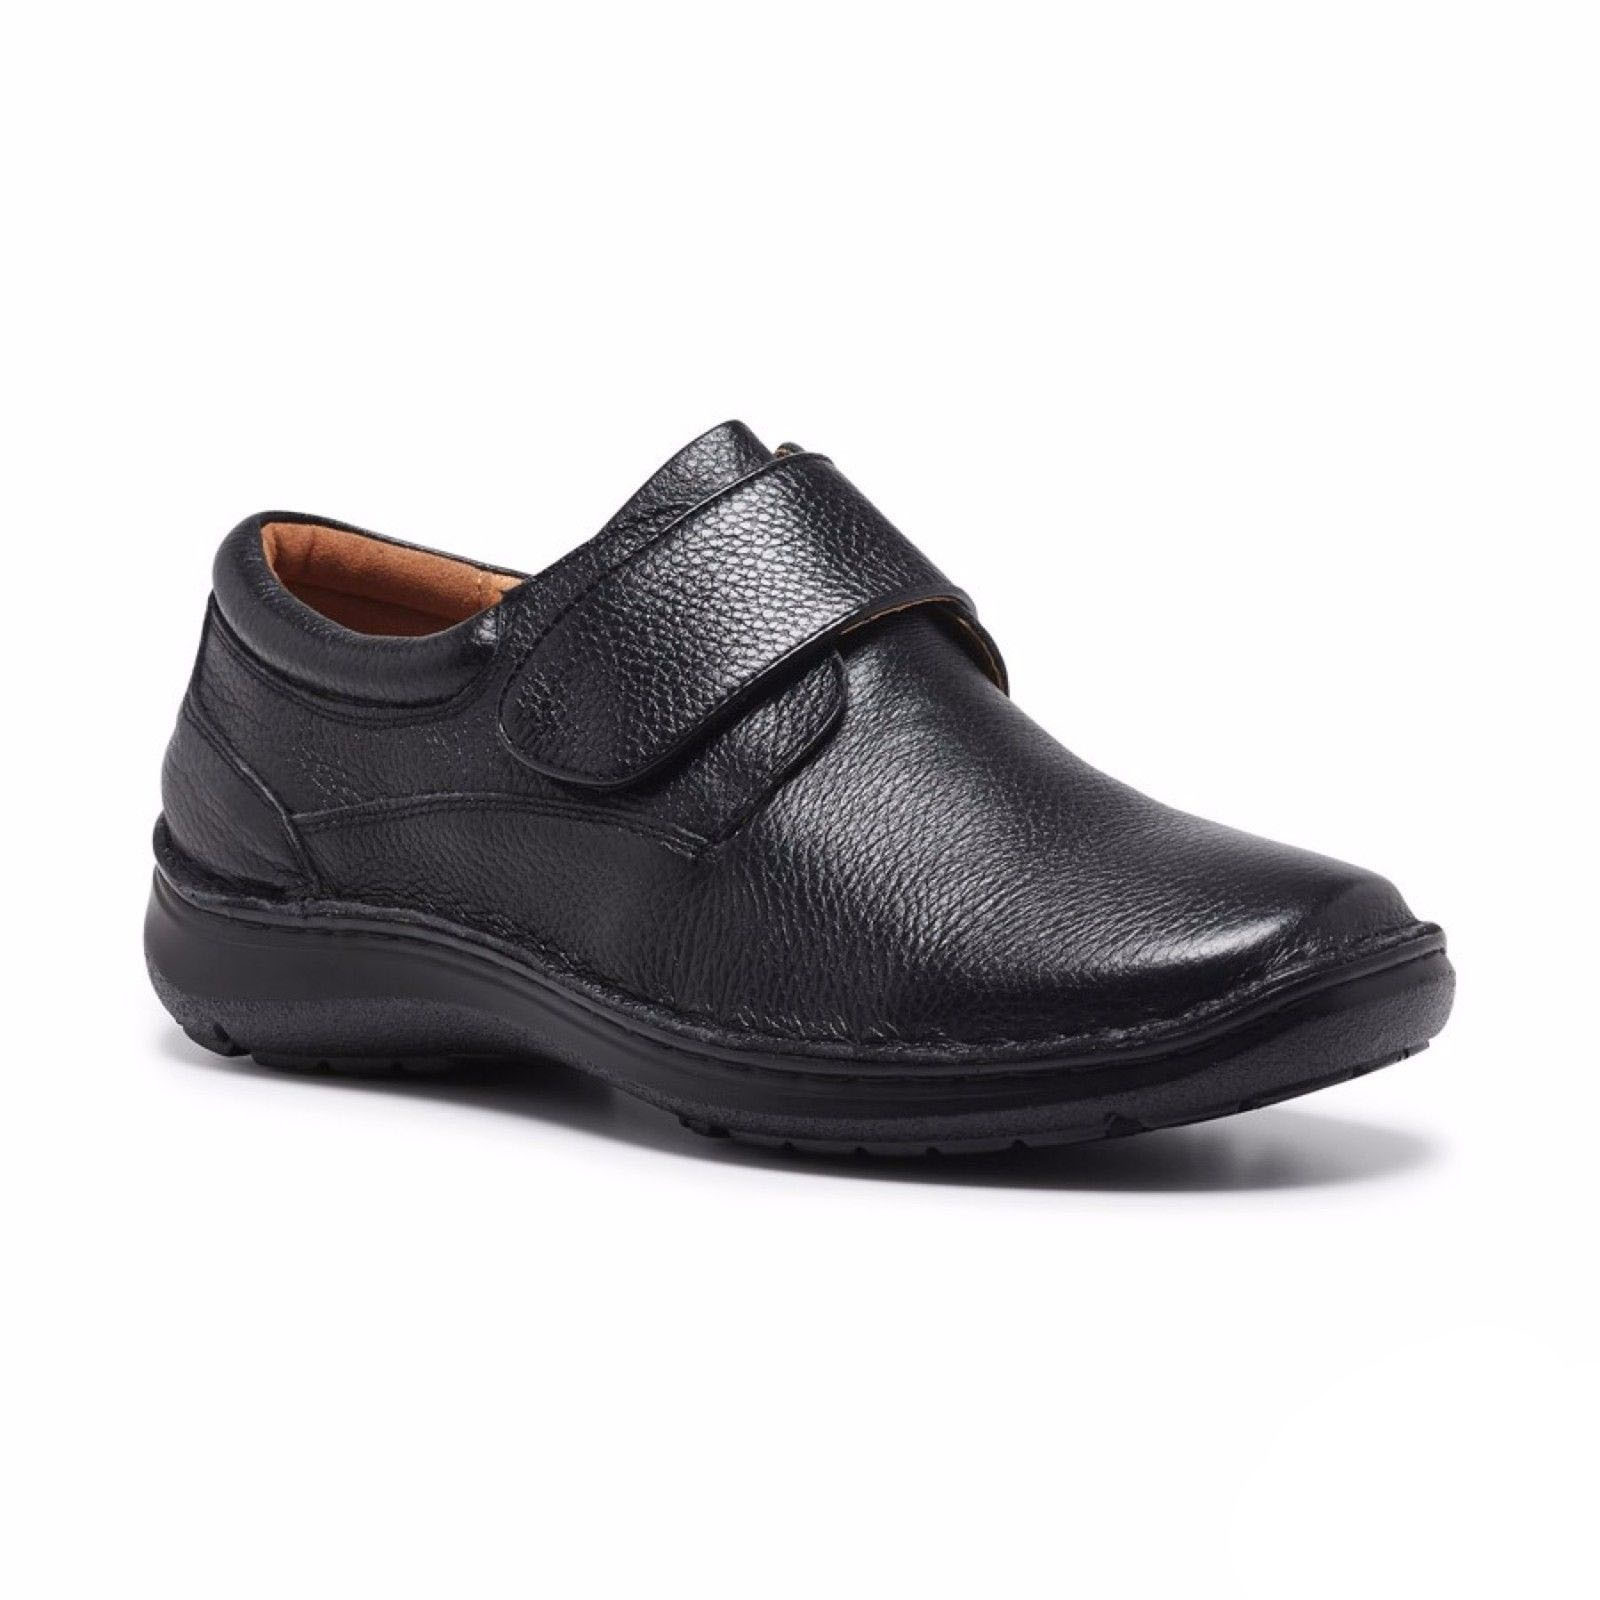 HUSH,PUPPIES BLOKE Leather Shoes Slip On Extra Wide Work All Day Comfort